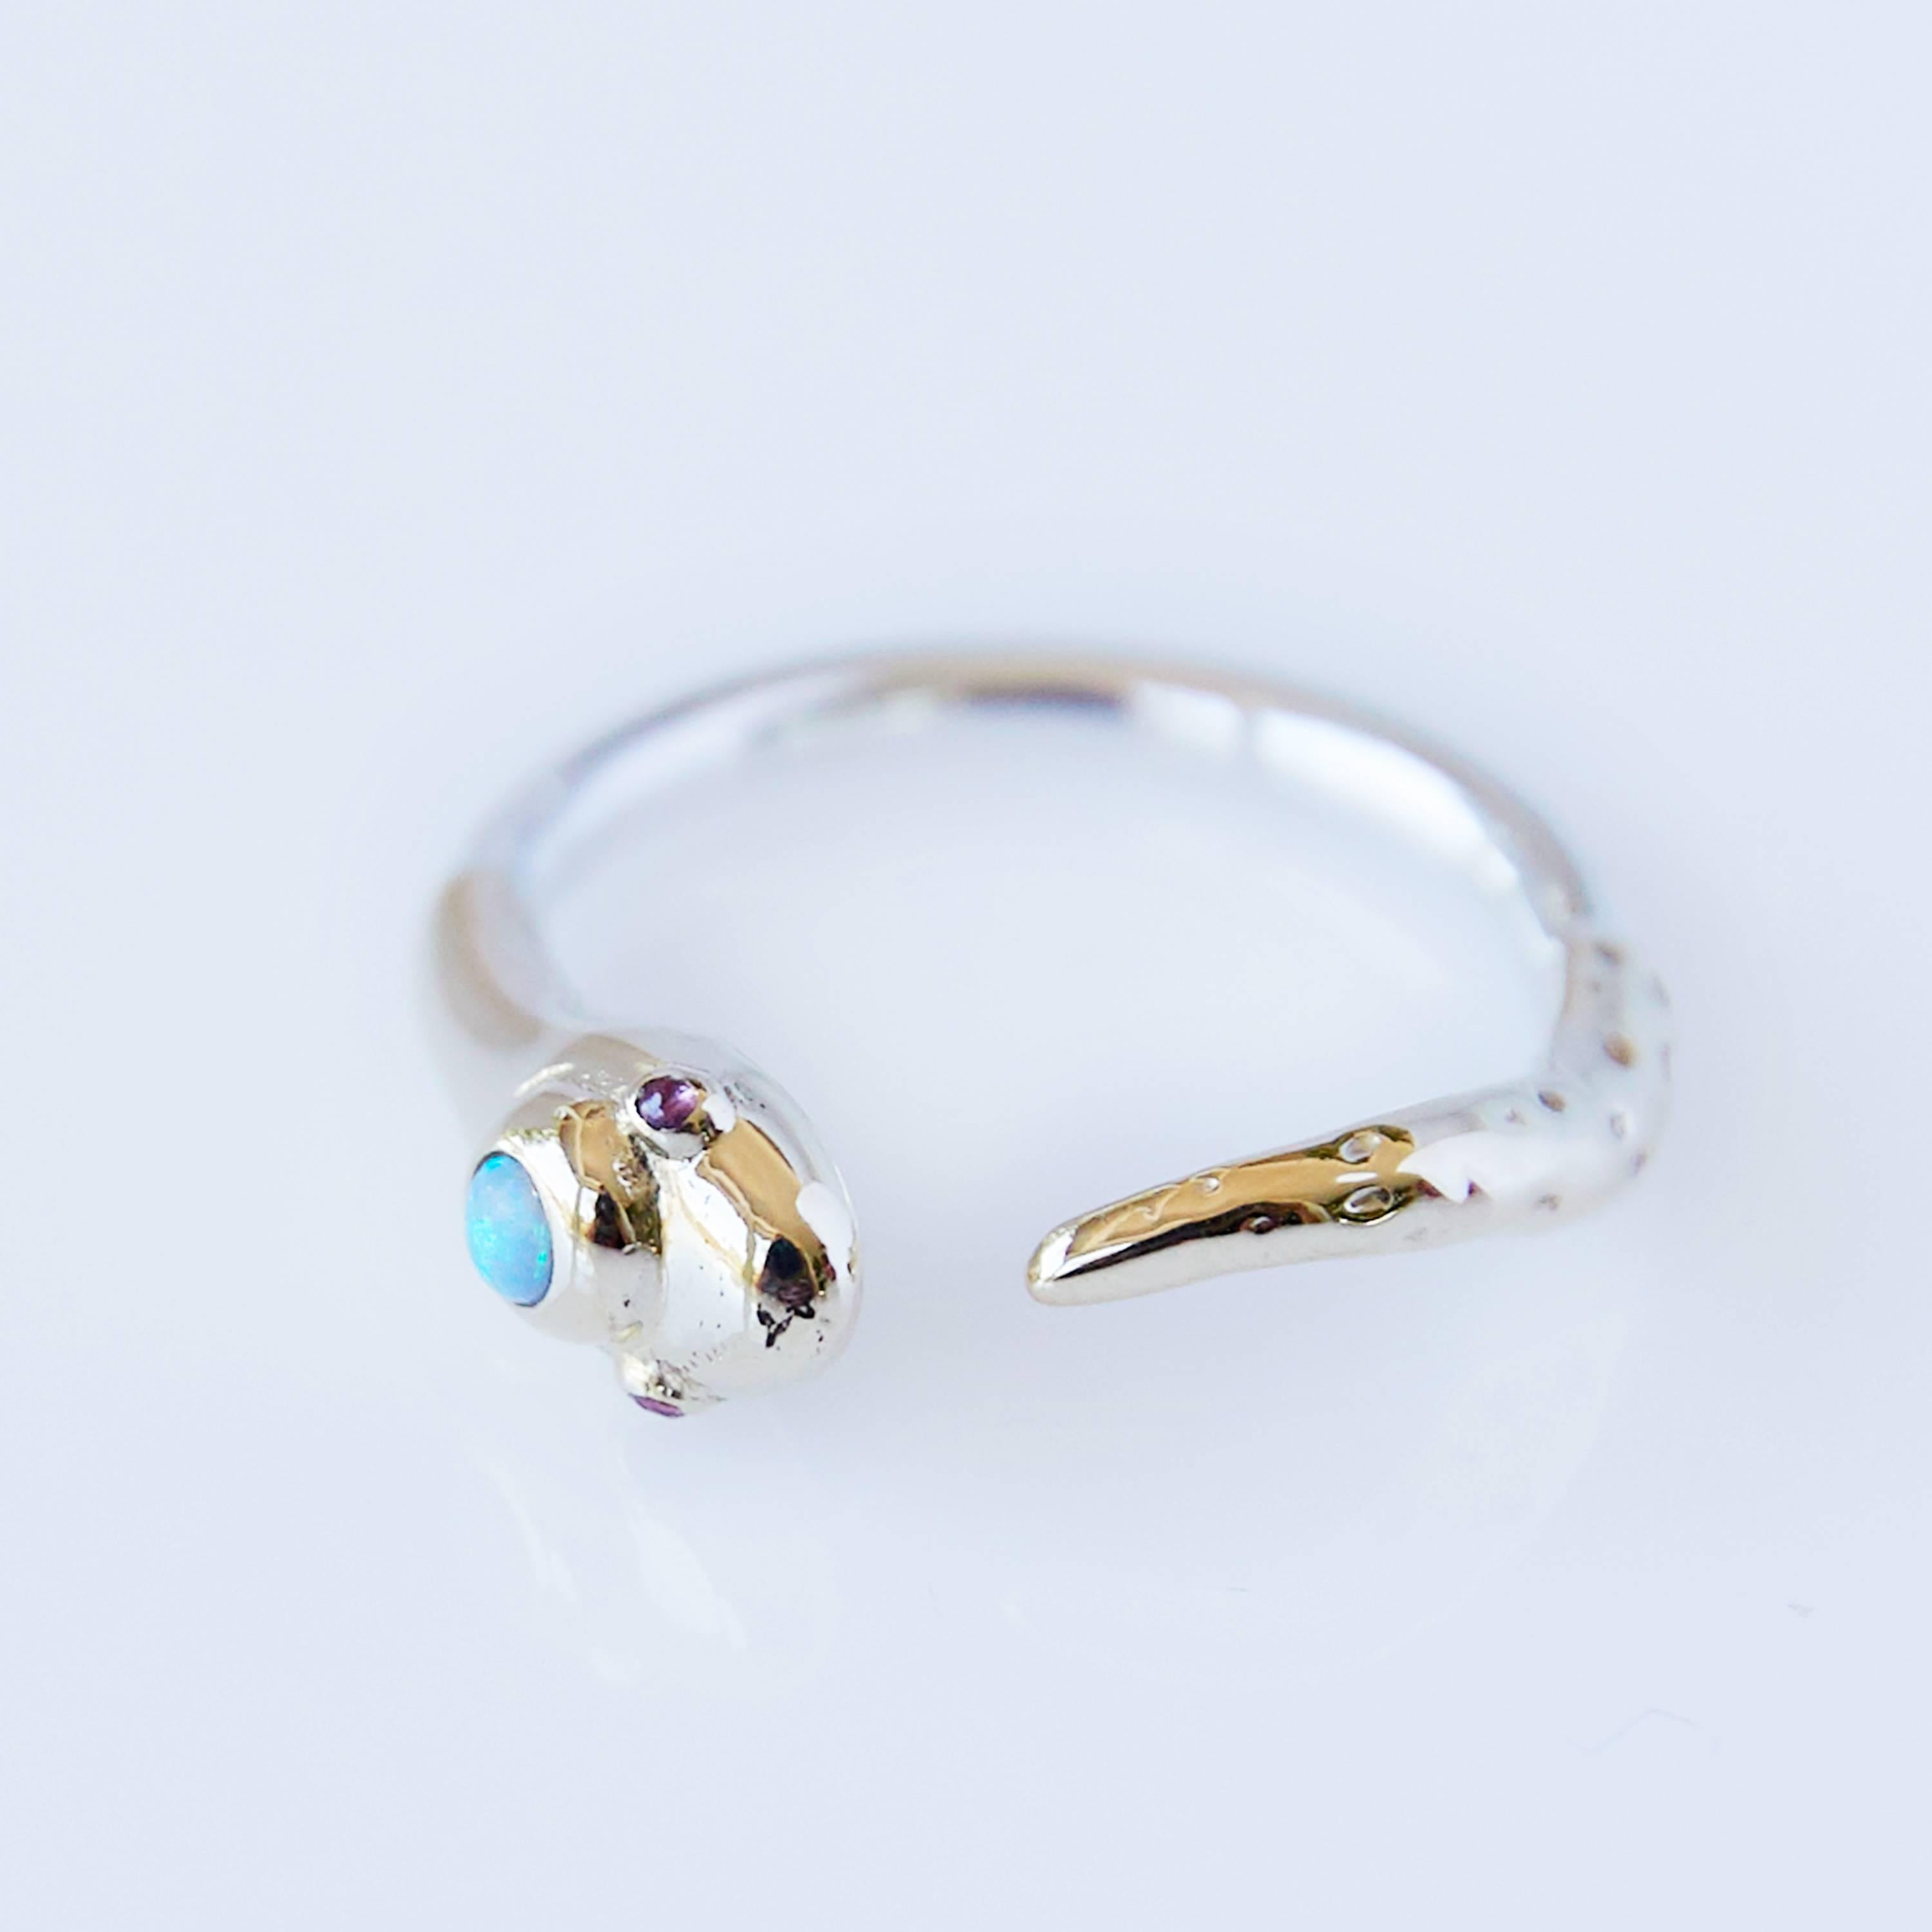 Opal Ruby Snake Ring in Gold and Silver
J DAUPHIN 